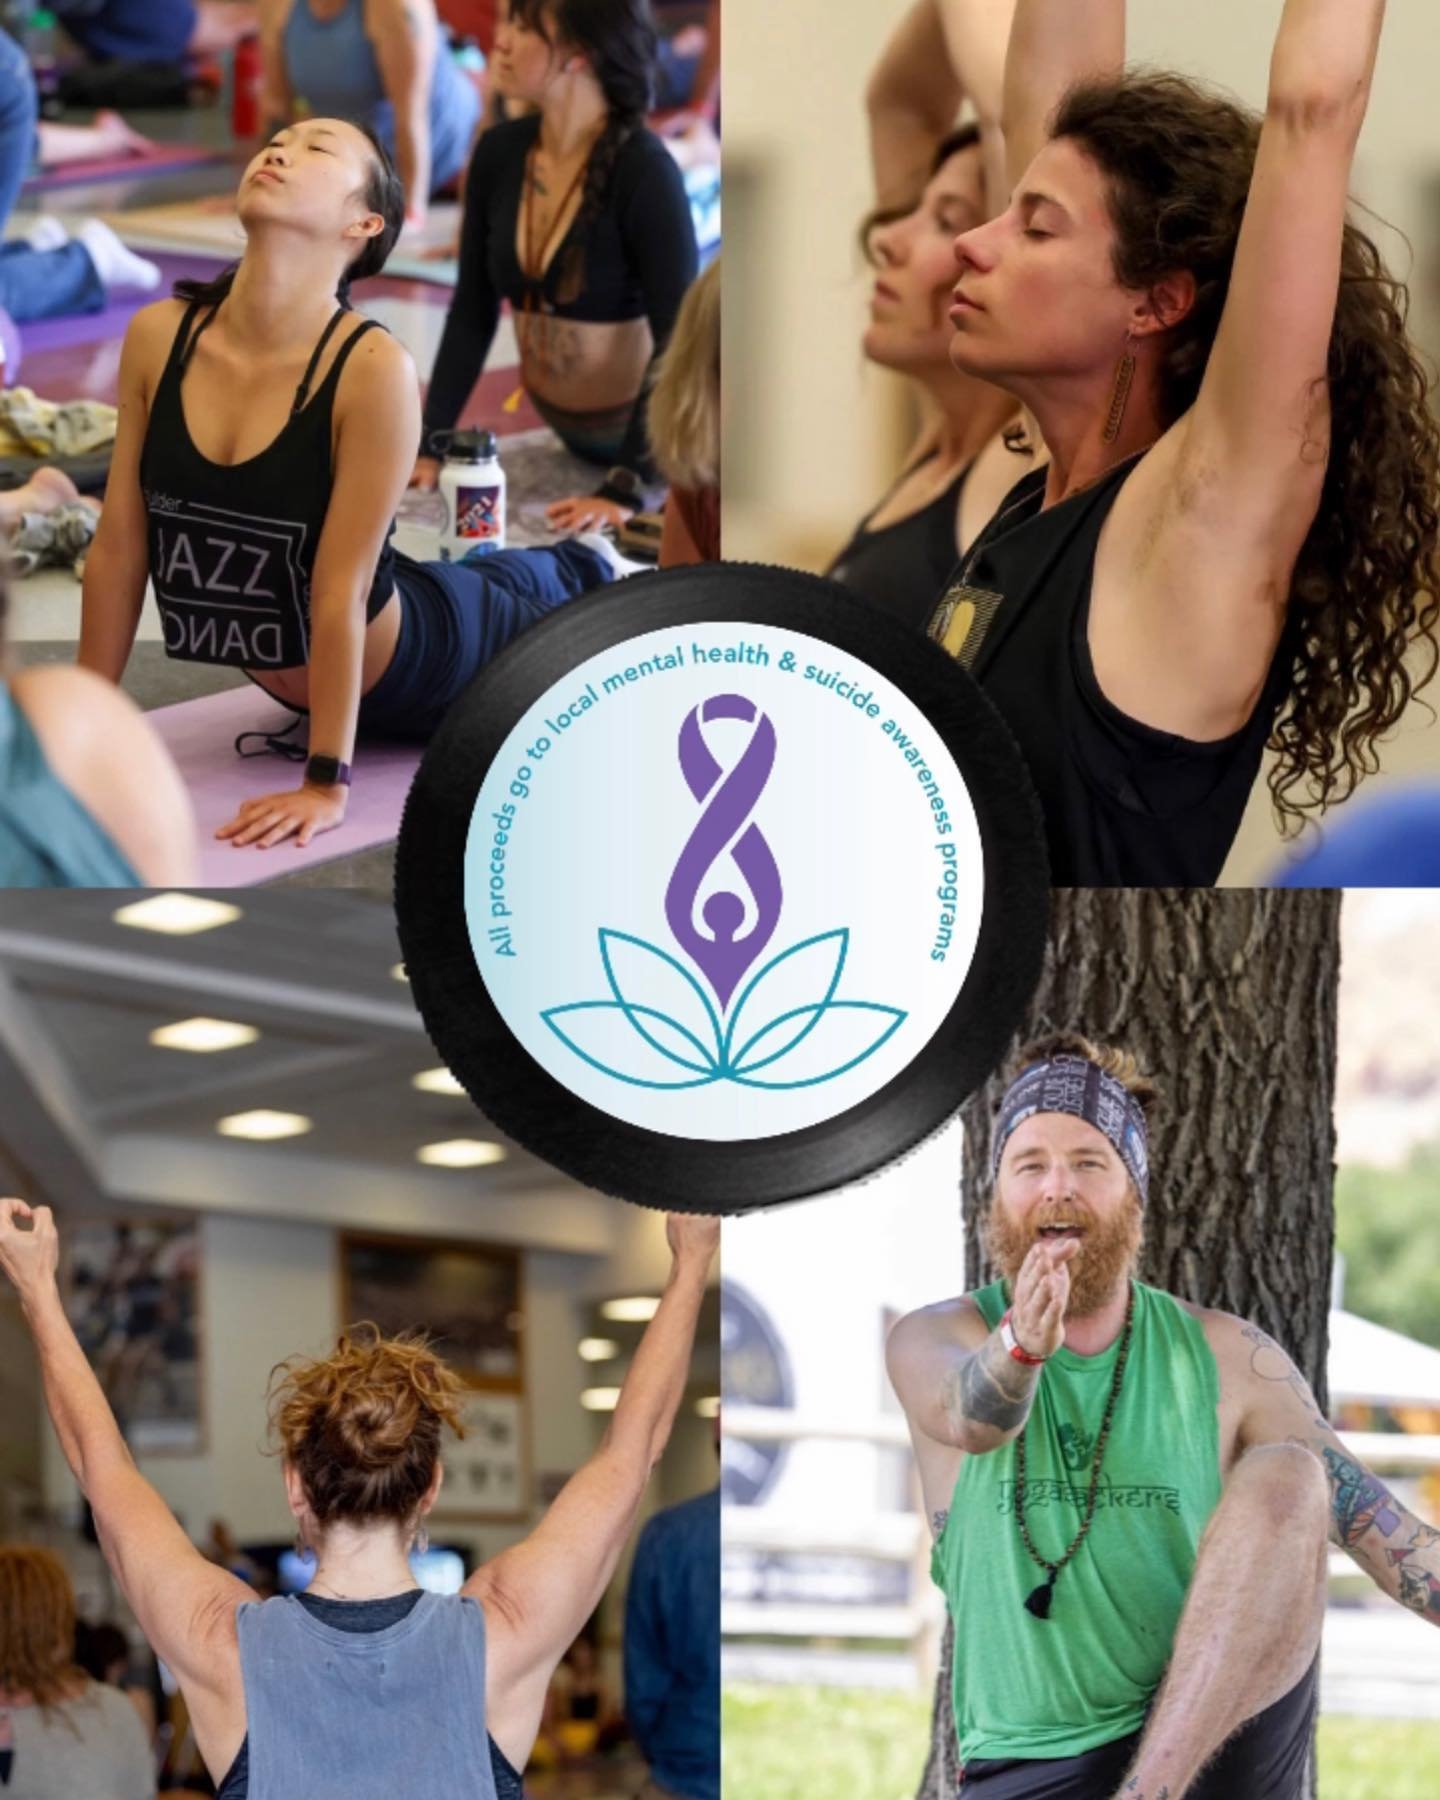 Grand Valley Yoga Fest is a 3-day retreat in the heart of Colorado&rsquo;s peach and wine country in Palisade. Featuring over 30 teachers
and presenters and offering more than 50 experiences, from yoga classes and workshops to inspiring lectures, int